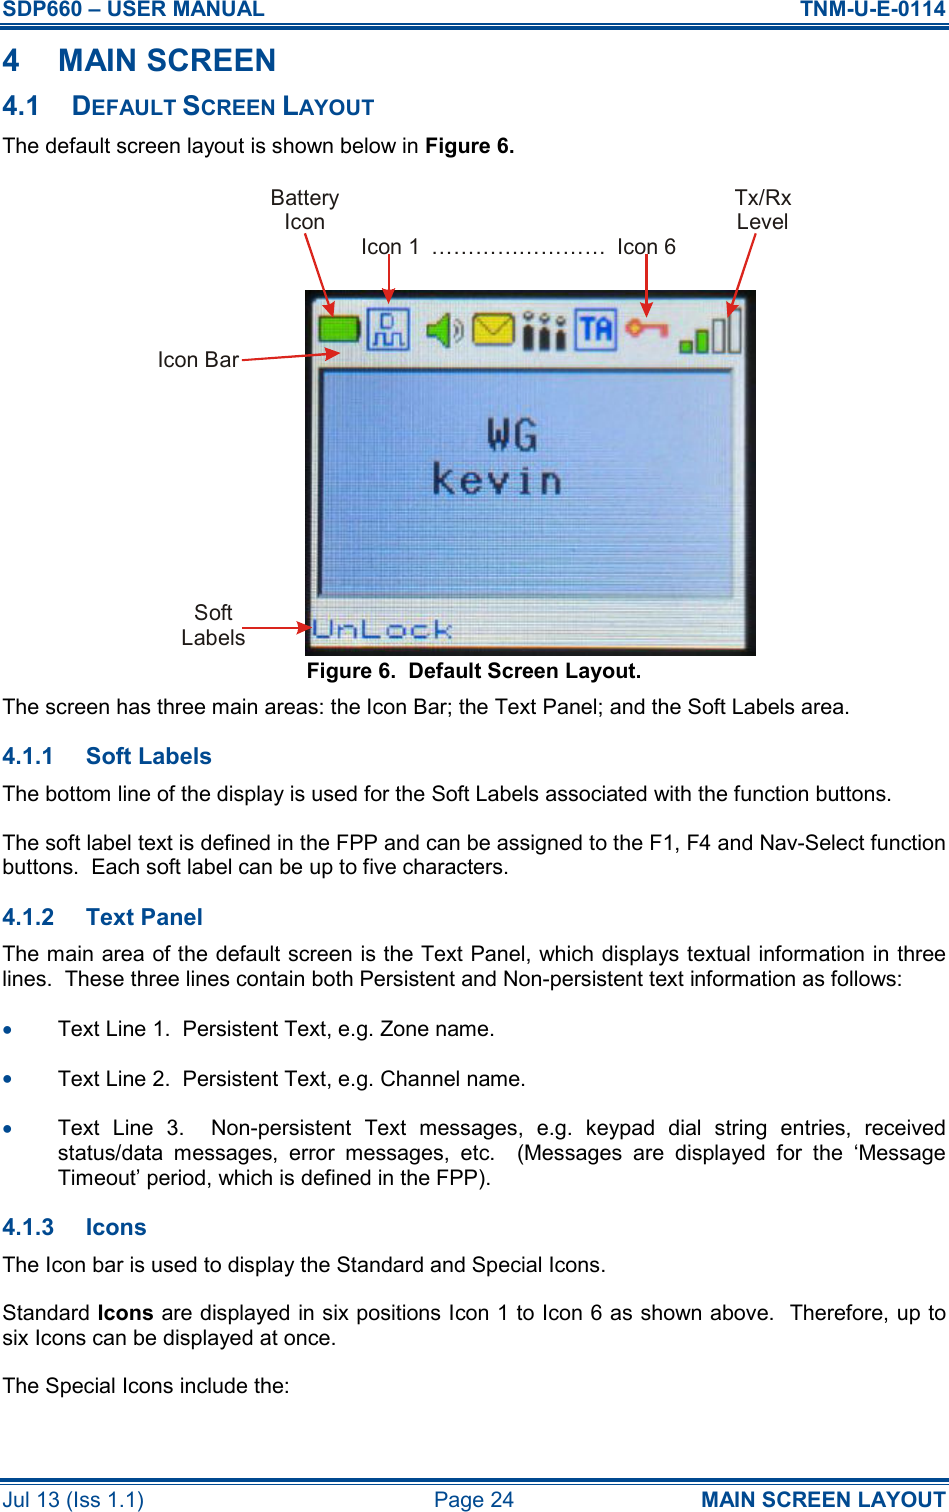 SDP660 – USER MANUAL  TNM-U-E-0114 Jul 13 (Iss 1.1)  Page 24  MAIN SCREEN LAYOUT 4  MAIN SCREEN 4.1  DEFAULT SCREEN LAYOUT The default screen layout is shown below in Figure 6. Figure 6.  Default Screen Layout. The screen has three main areas: the Icon Bar; the Text Panel; and the Soft Labels area. 4.1.1  Soft Labels The bottom line of the display is used for the Soft Labels associated with the function buttons. The soft label text is defined in the FPP and can be assigned to the F1, F4 and Nav-Select function buttons.  Each soft label can be up to five characters. 4.1.2  Text Panel The main area of the default screen is the Text Panel, which displays textual information in three lines.  These three lines contain both Persistent and Non-persistent text information as follows: •  Text Line 1.  Persistent Text, e.g. Zone name. •  Text Line 2.  Persistent Text, e.g. Channel name. •  Text  Line  3.    Non-persistent  Text  messages,  e.g.  keypad  dial  string  entries,  received status/data  messages,  error  messages,  etc.    (Messages  are  displayed  for  the  ‘Message Timeout’ period, which is defined in the FPP). 4.1.3  Icons The Icon bar is used to display the Standard and Special Icons. Standard Icons are displayed in six positions Icon 1 to Icon 6 as shown above.  Therefore, up to six Icons can be displayed at once. The Special Icons include the: BatteryIconTx/RxLevelIcon 1 Icon 6……………………SoftLabelsIcon Bar